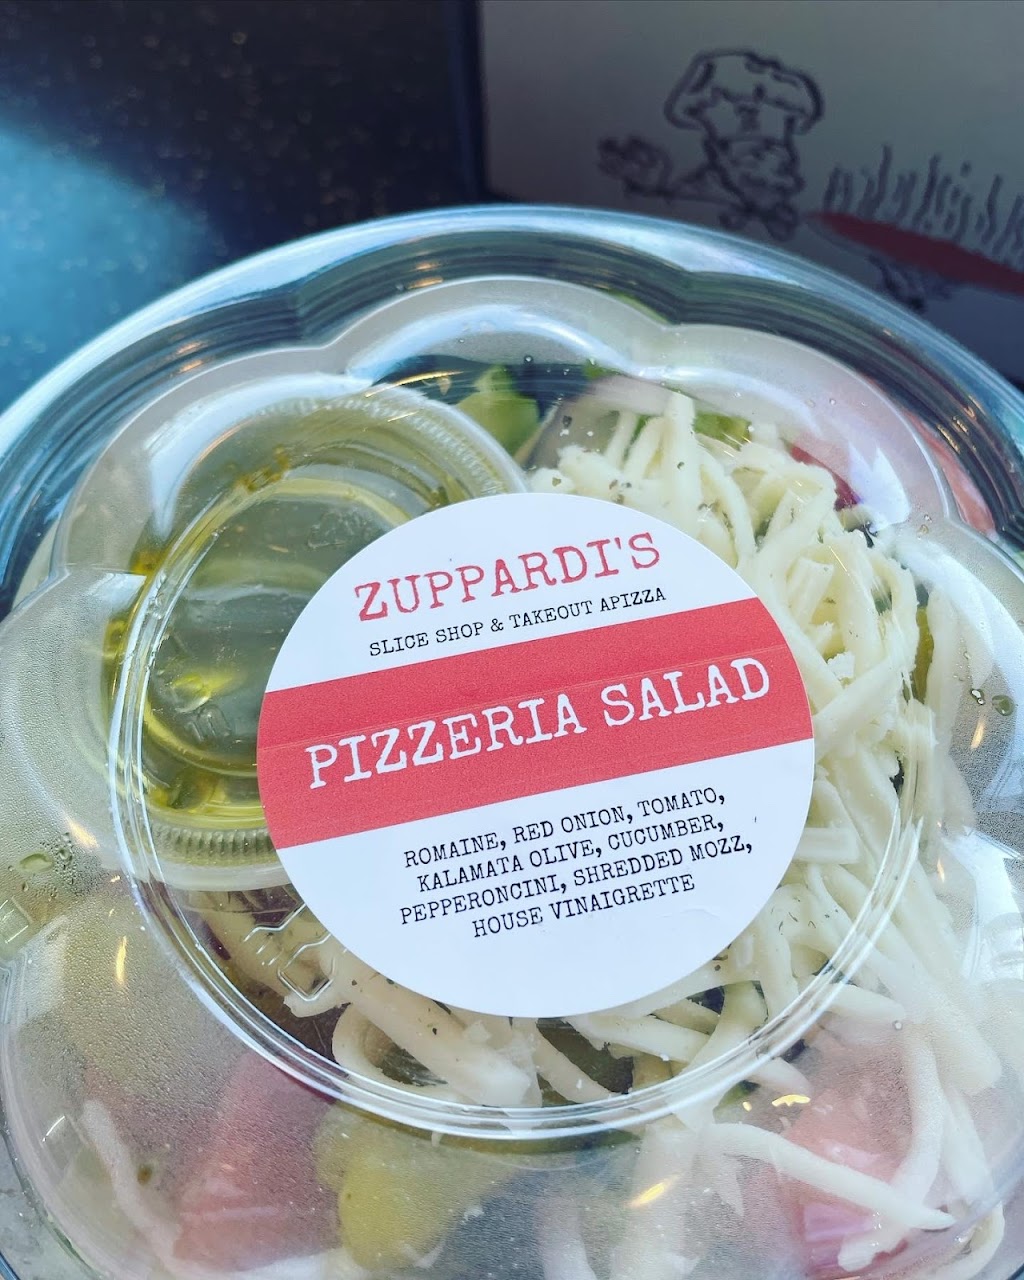 Zuppardis - Slice Shop & Takeout Apizza | 58 Beaver St, Ansonia, CT 06401 | Phone: (203) 751-9006